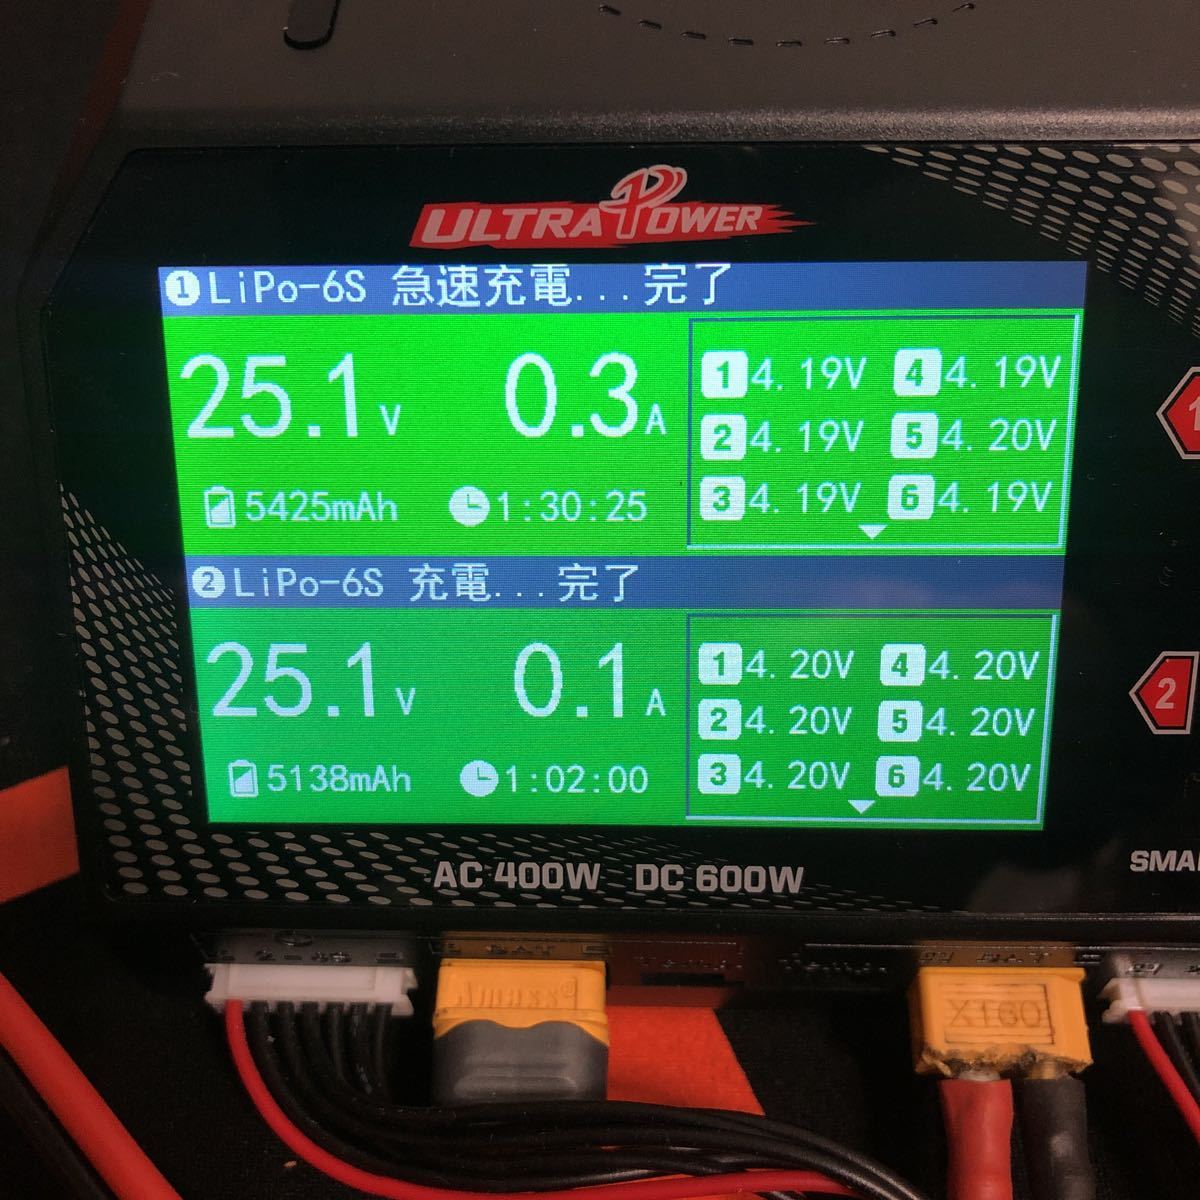 ULTRA POWER UP8 AC400W/DC600W コンパクト2ポート急速充電器 日本語 